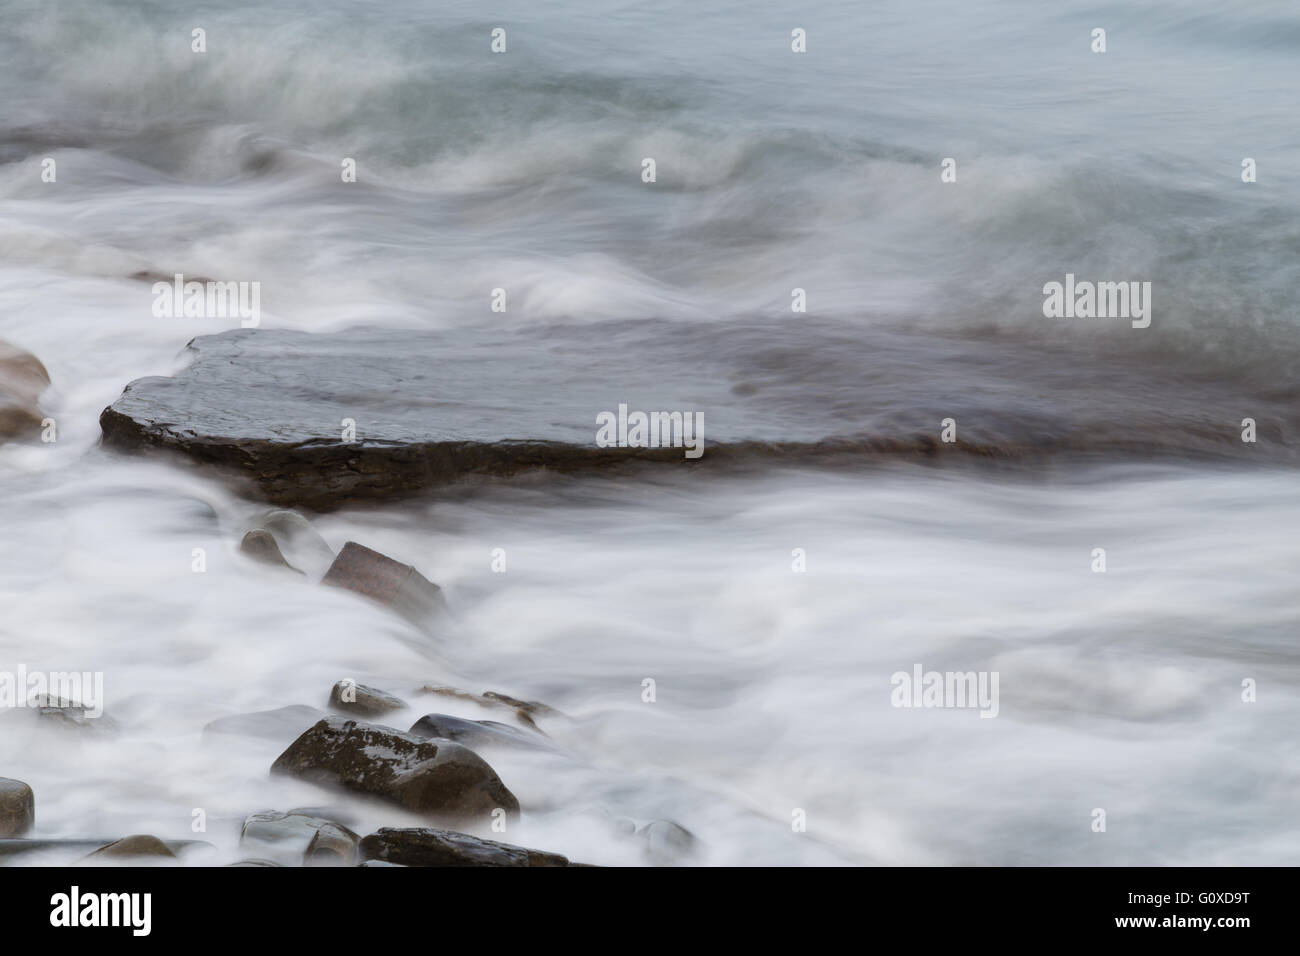 Slow shutter sea waves and rocks on the beach Stock Photo